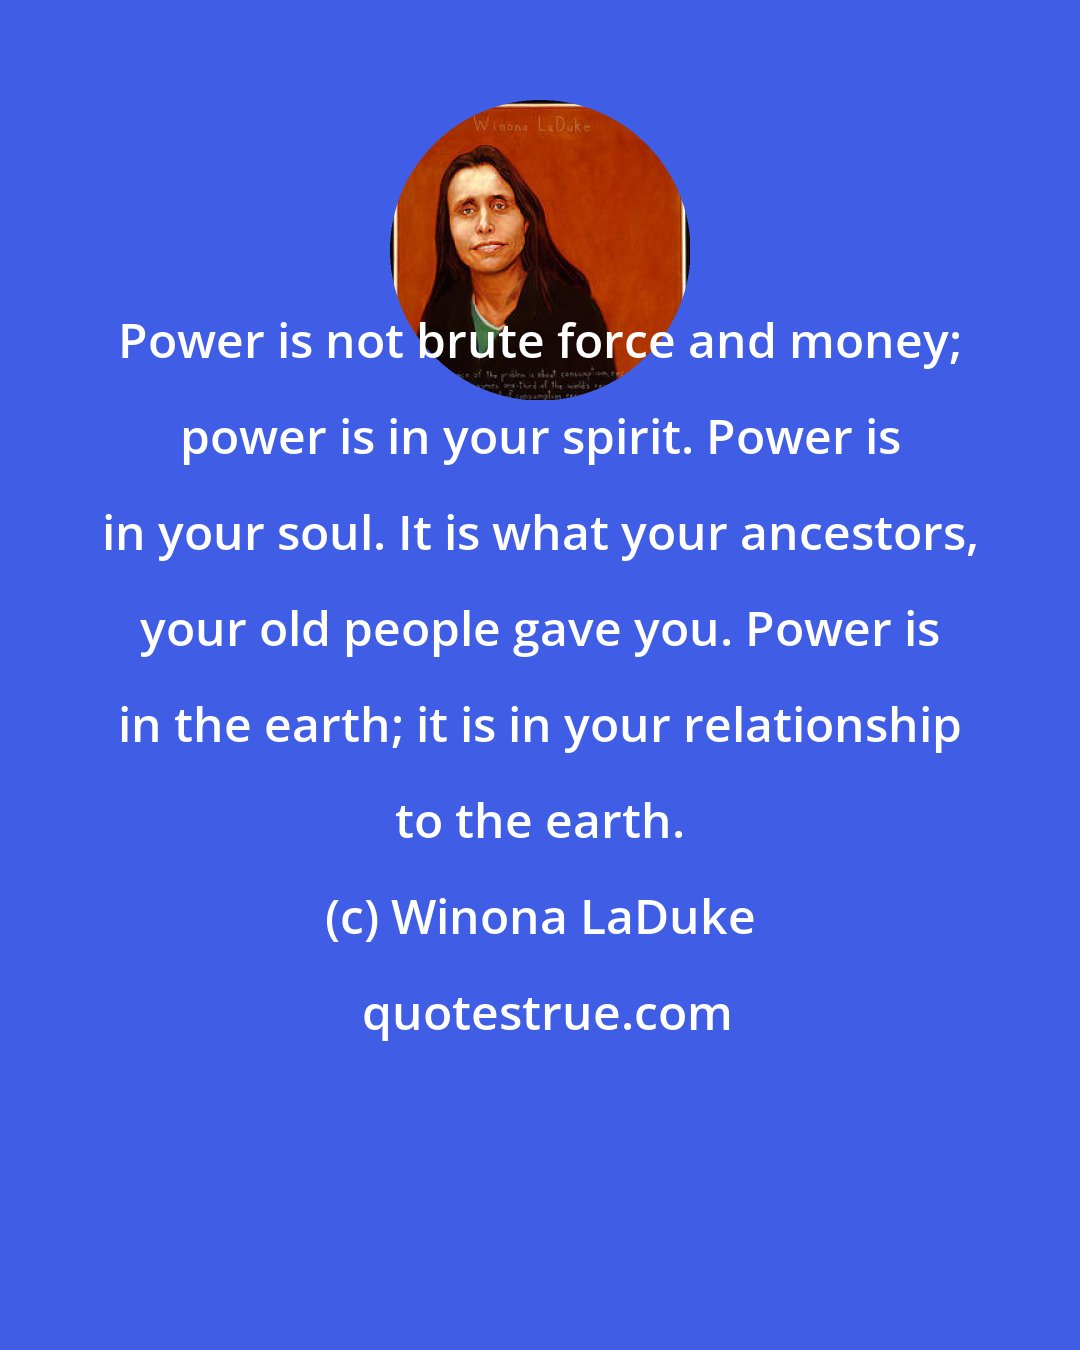 Winona LaDuke: Power is not brute force and money; power is in your spirit. Power is in your soul. It is what your ancestors, your old people gave you. Power is in the earth; it is in your relationship to the earth.